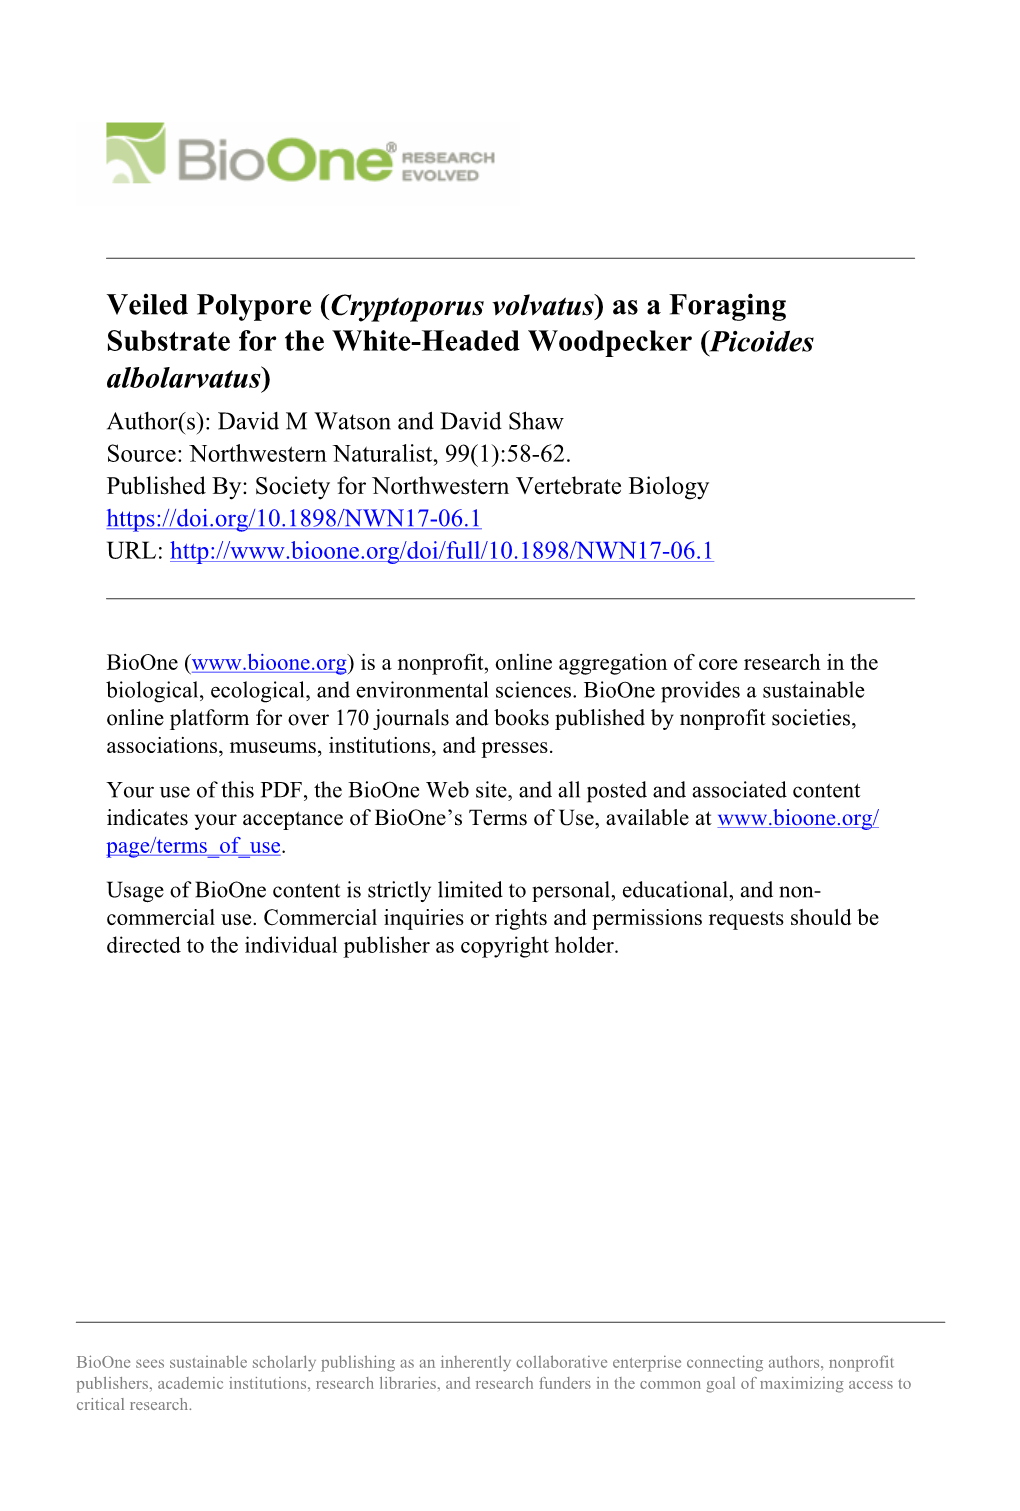 Veiled Polypore (Cryptoporus Volvatus) As a Foraging Substrate for The